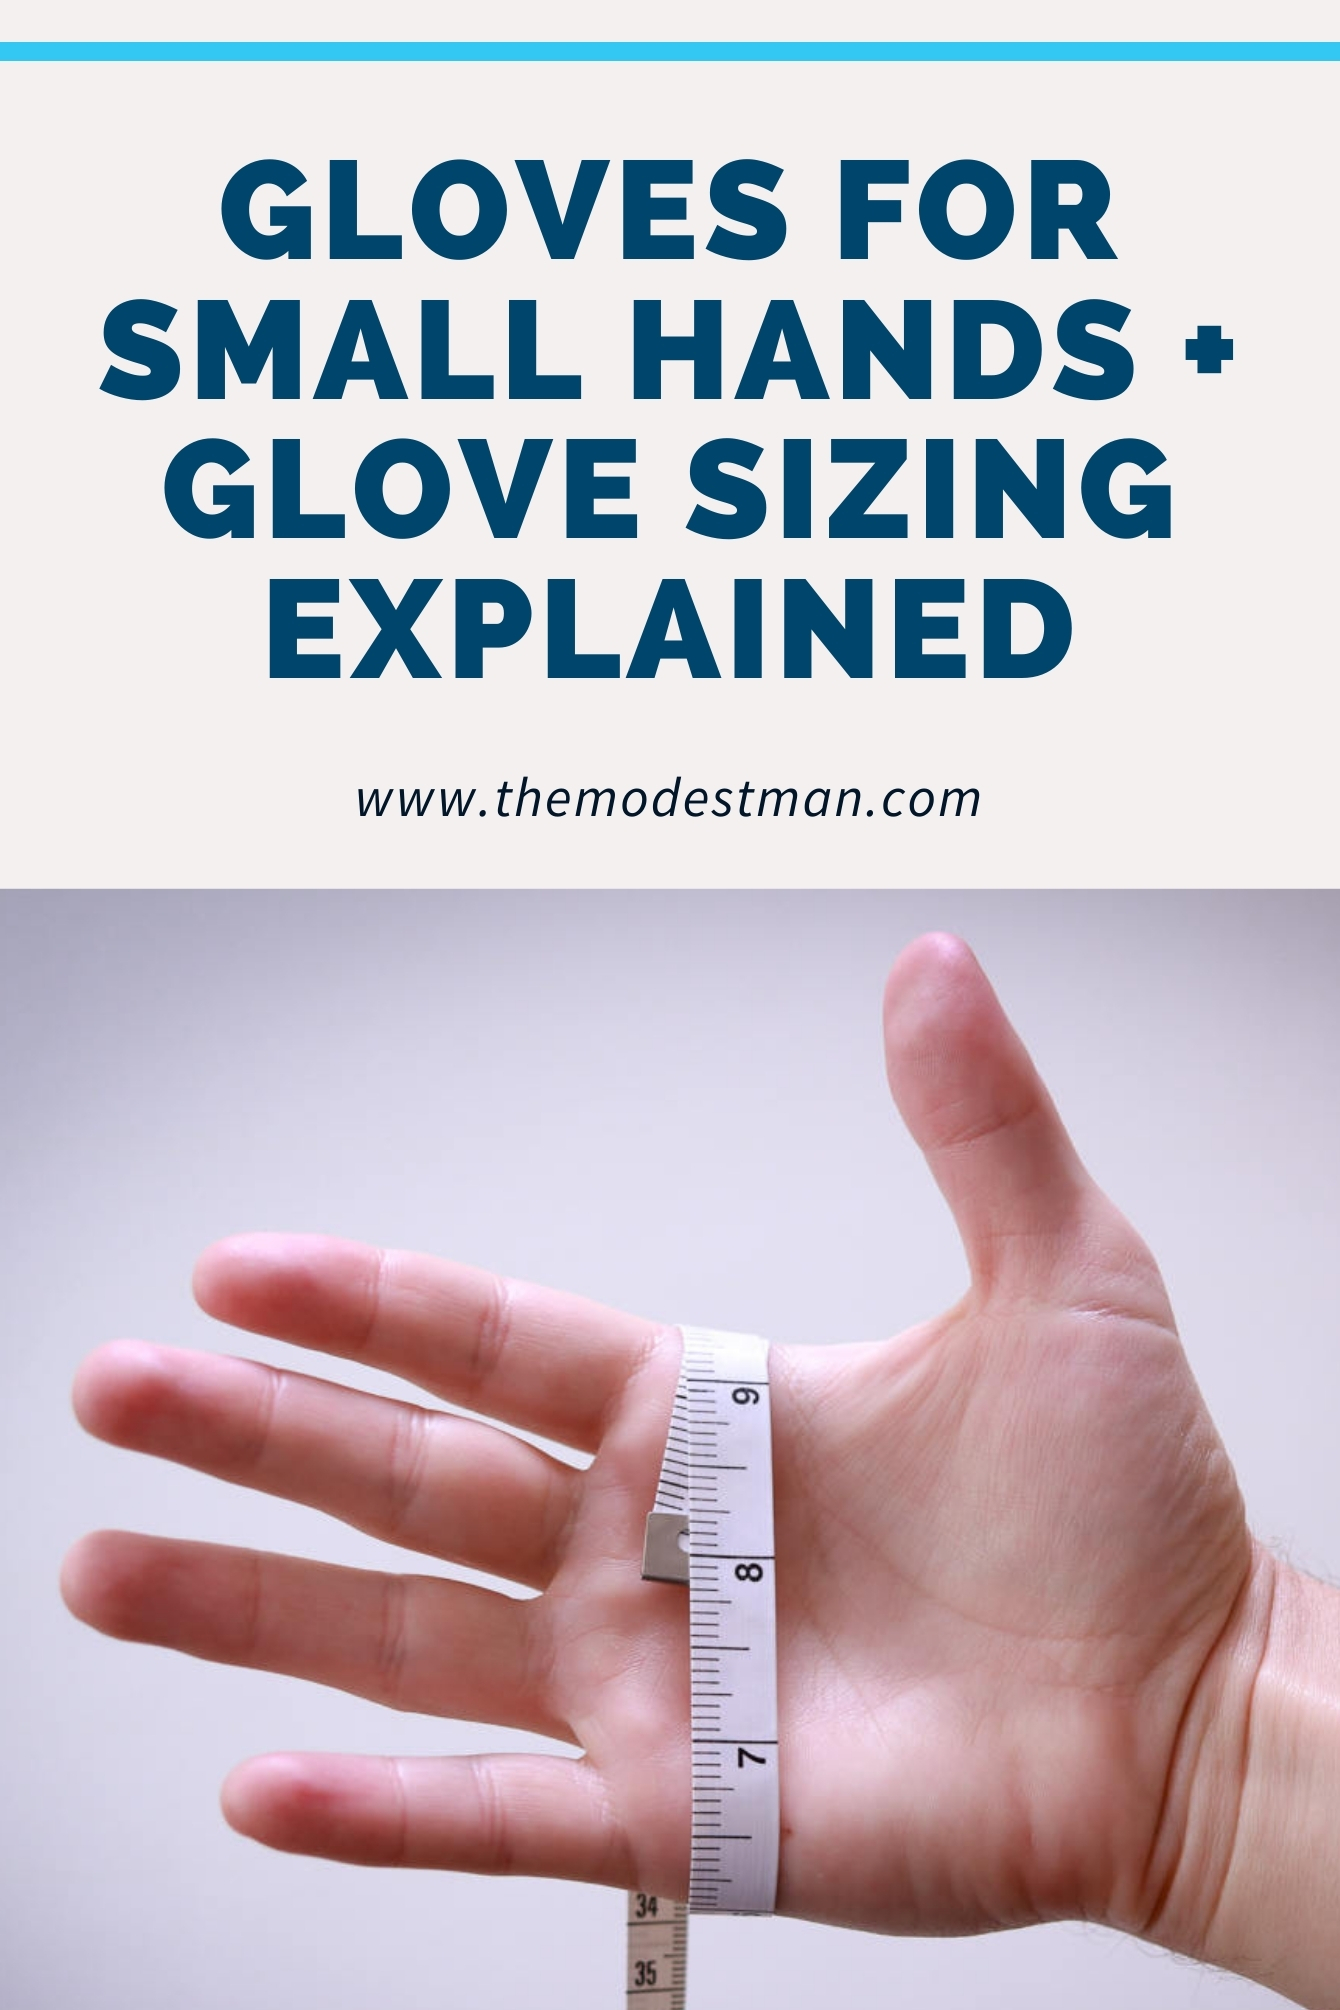 https://www.themodestman.com/wp-content/uploads/2017/11/Gloves-for-Small-Hands.jpg